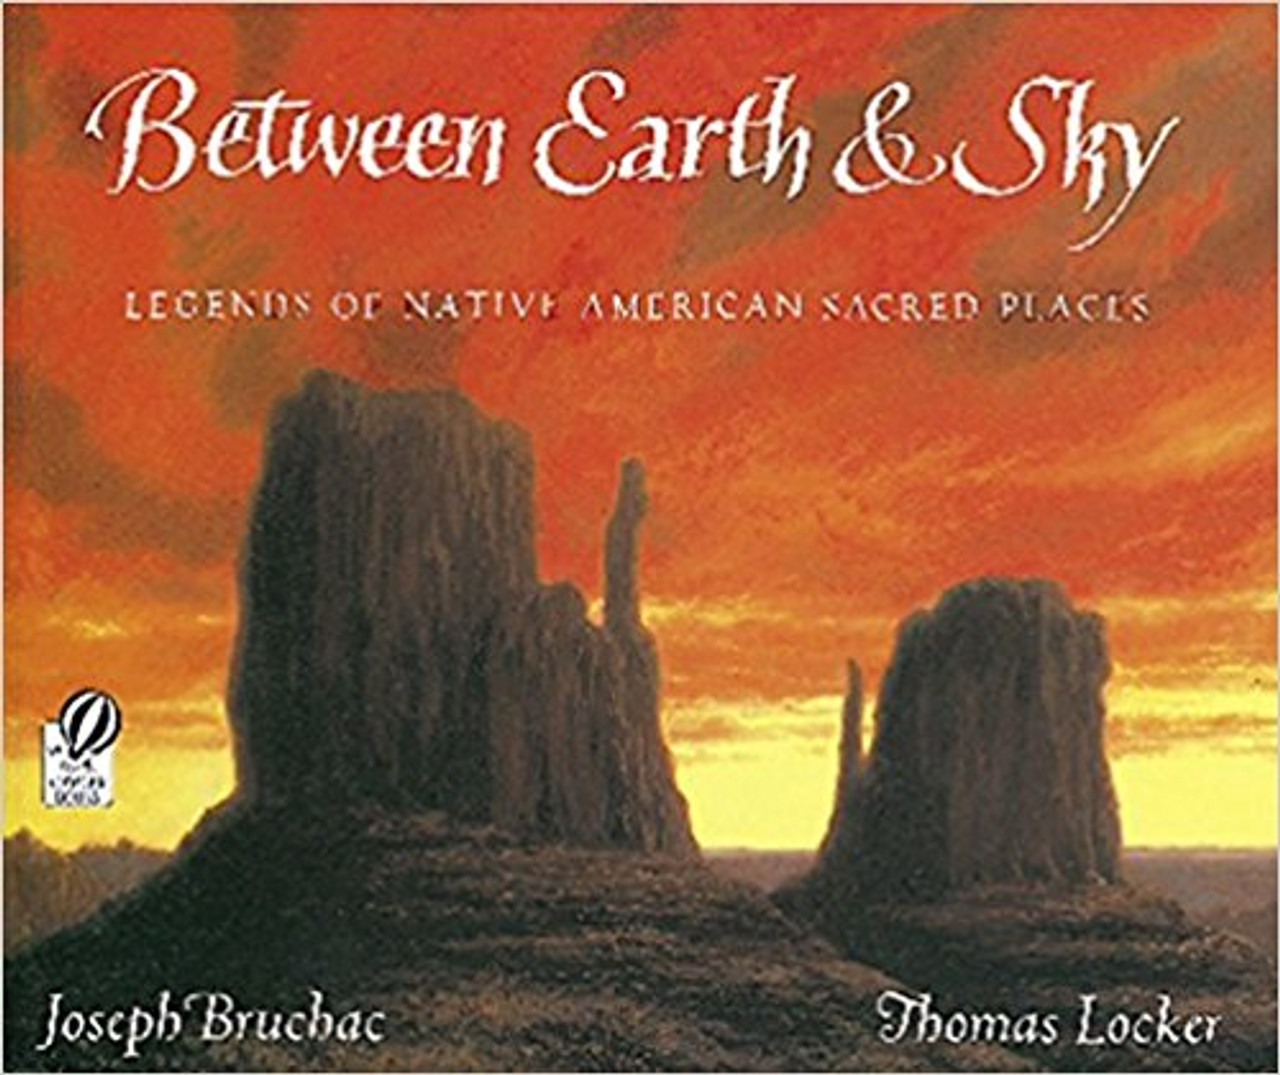 Between the Earth & Sky: Legends of Native American Sacred Places by Joseph Bruchac